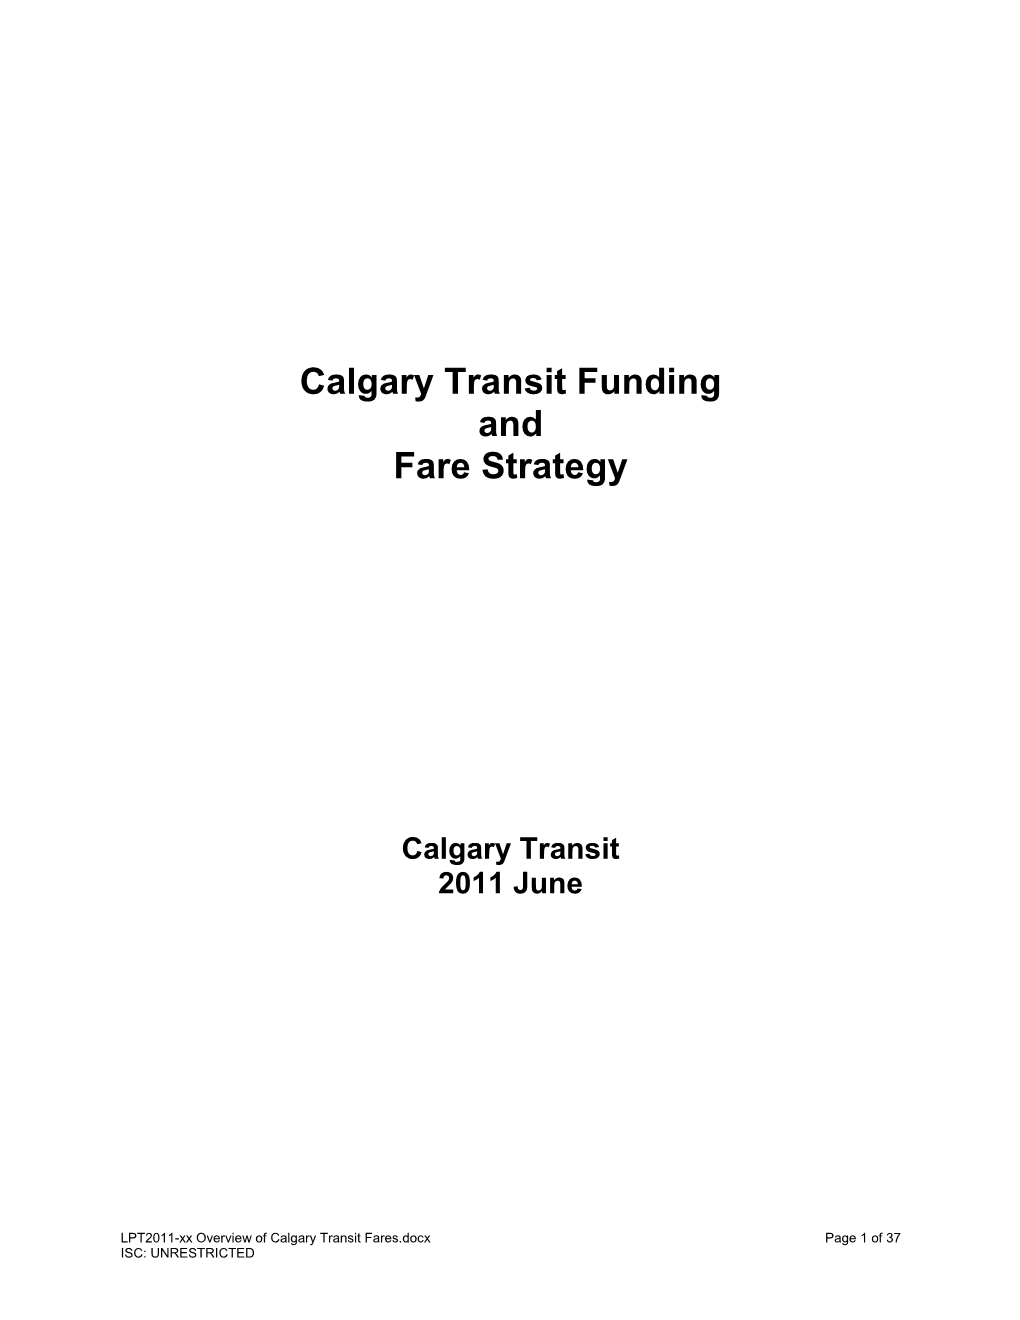 Calgary Transit Funding and Fare Strategy